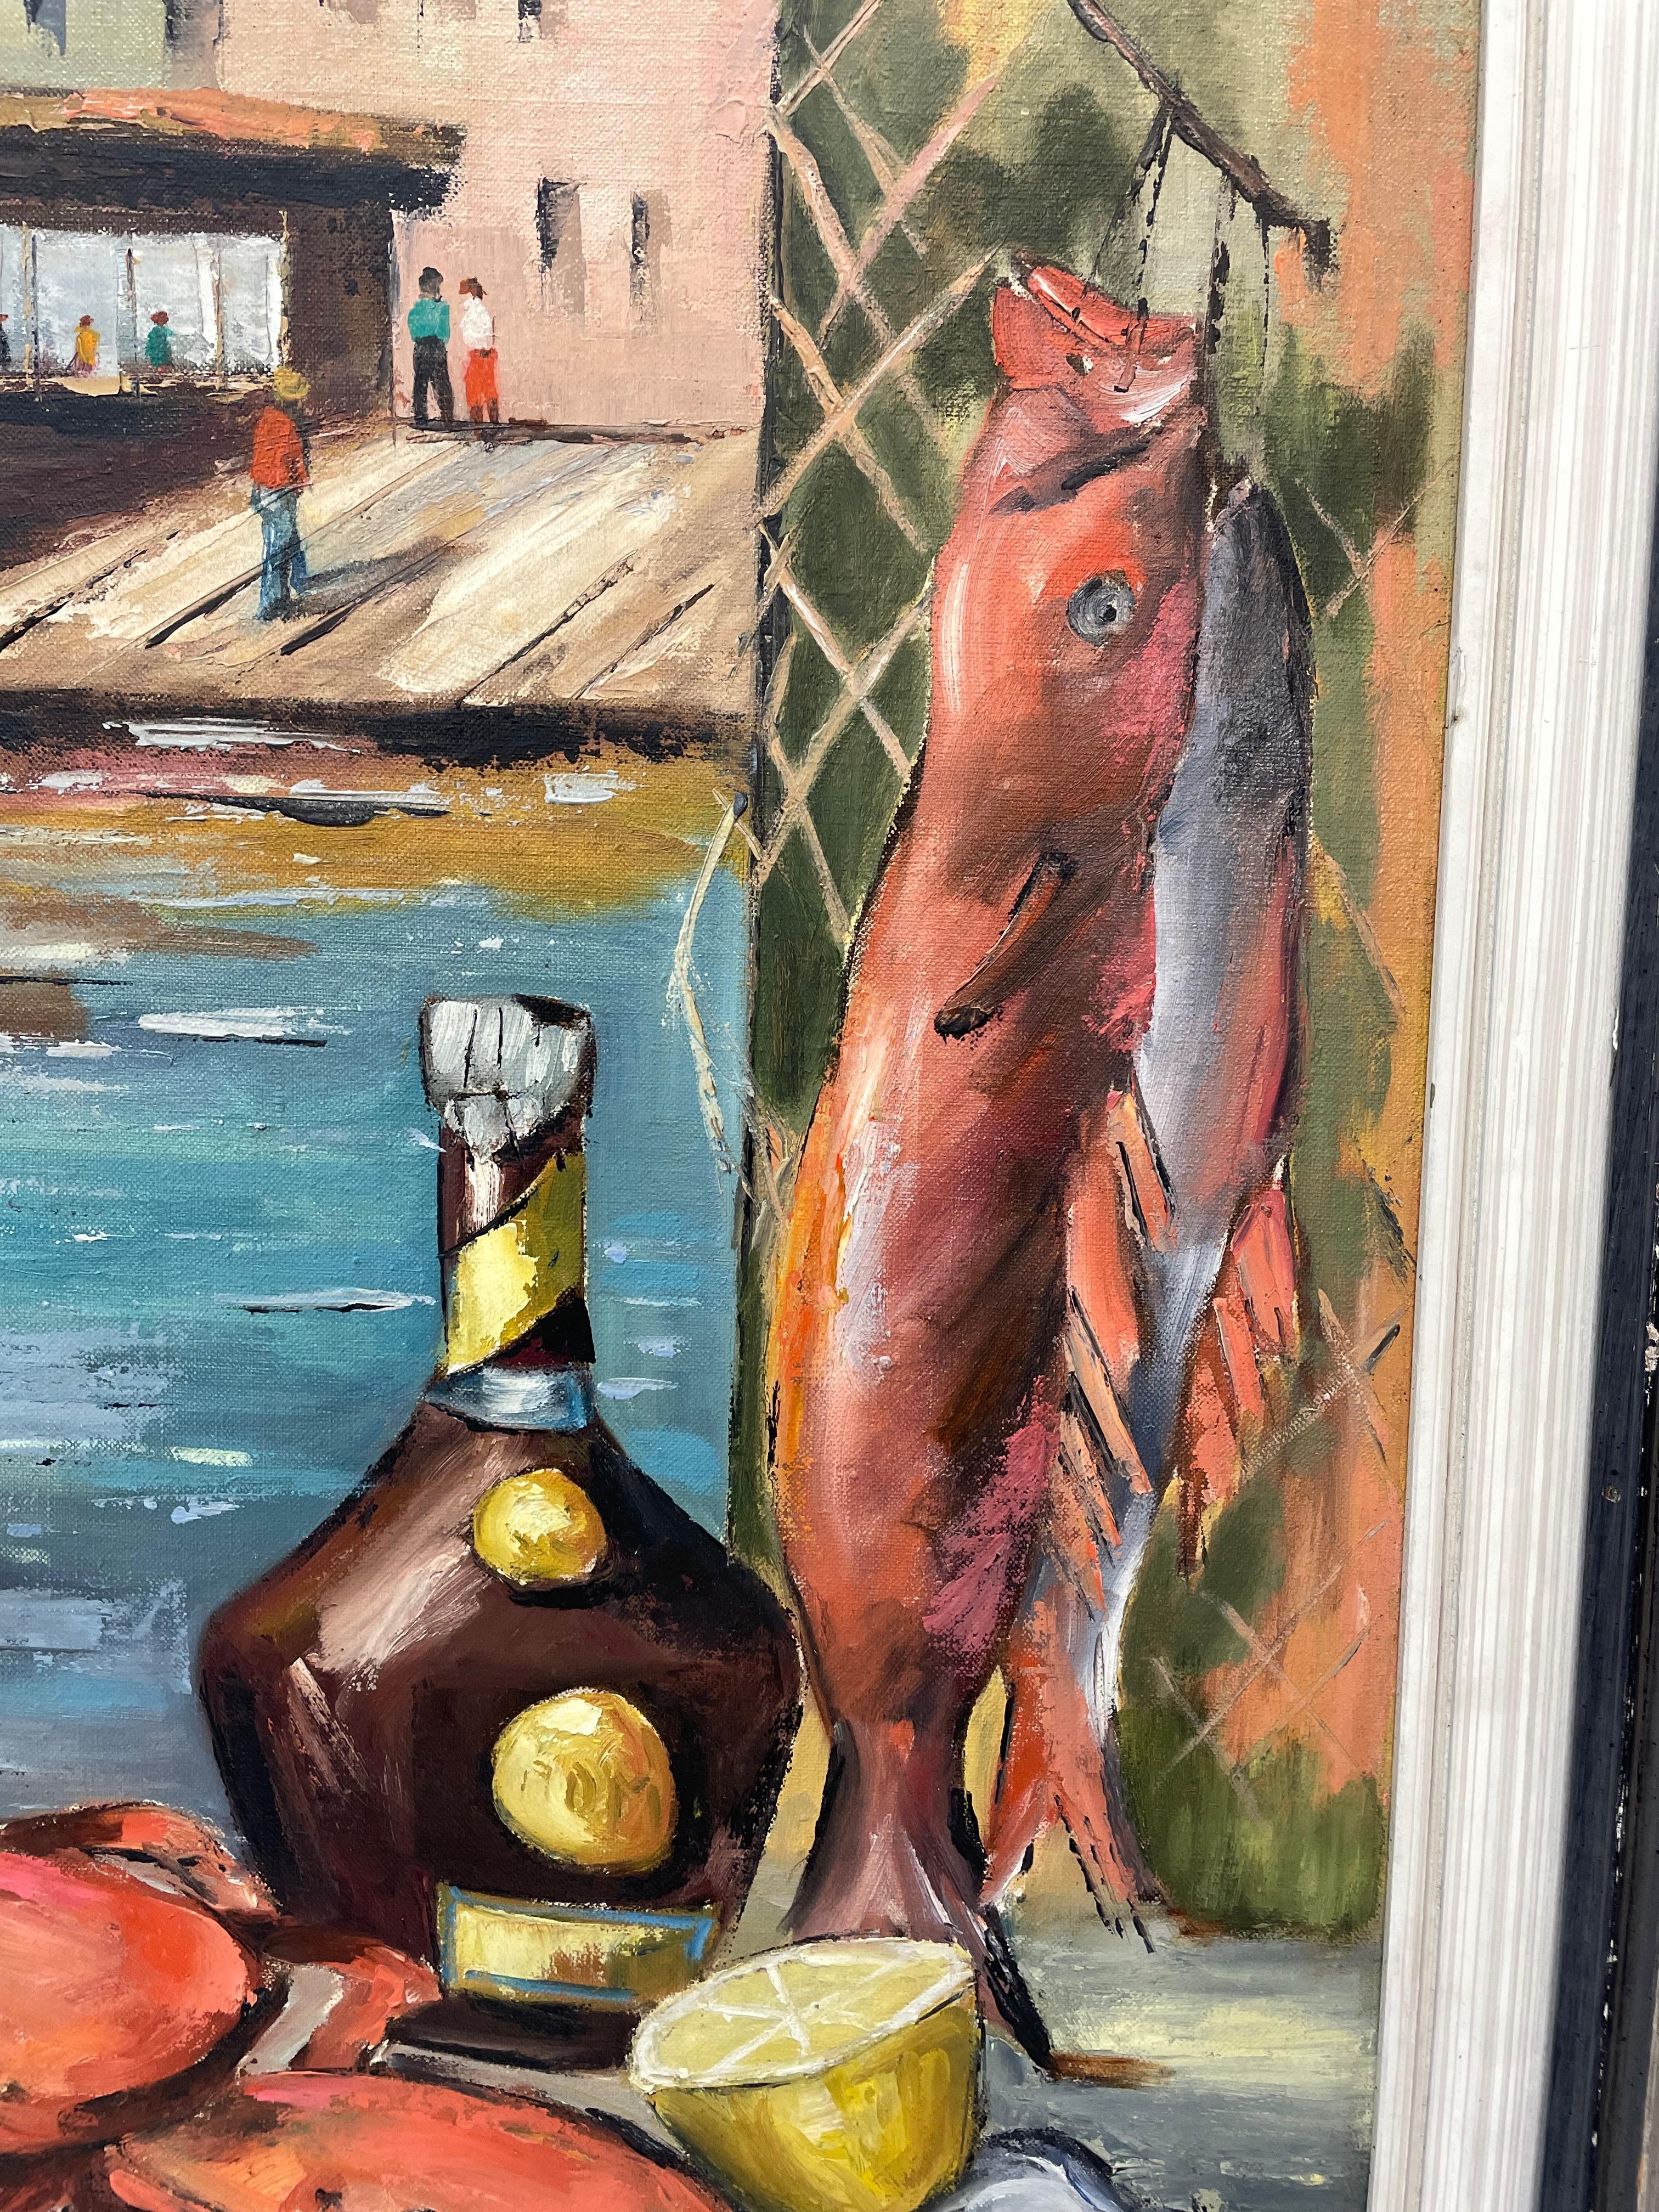 Fisherman’s Catch - Painting by Clifford Holmes